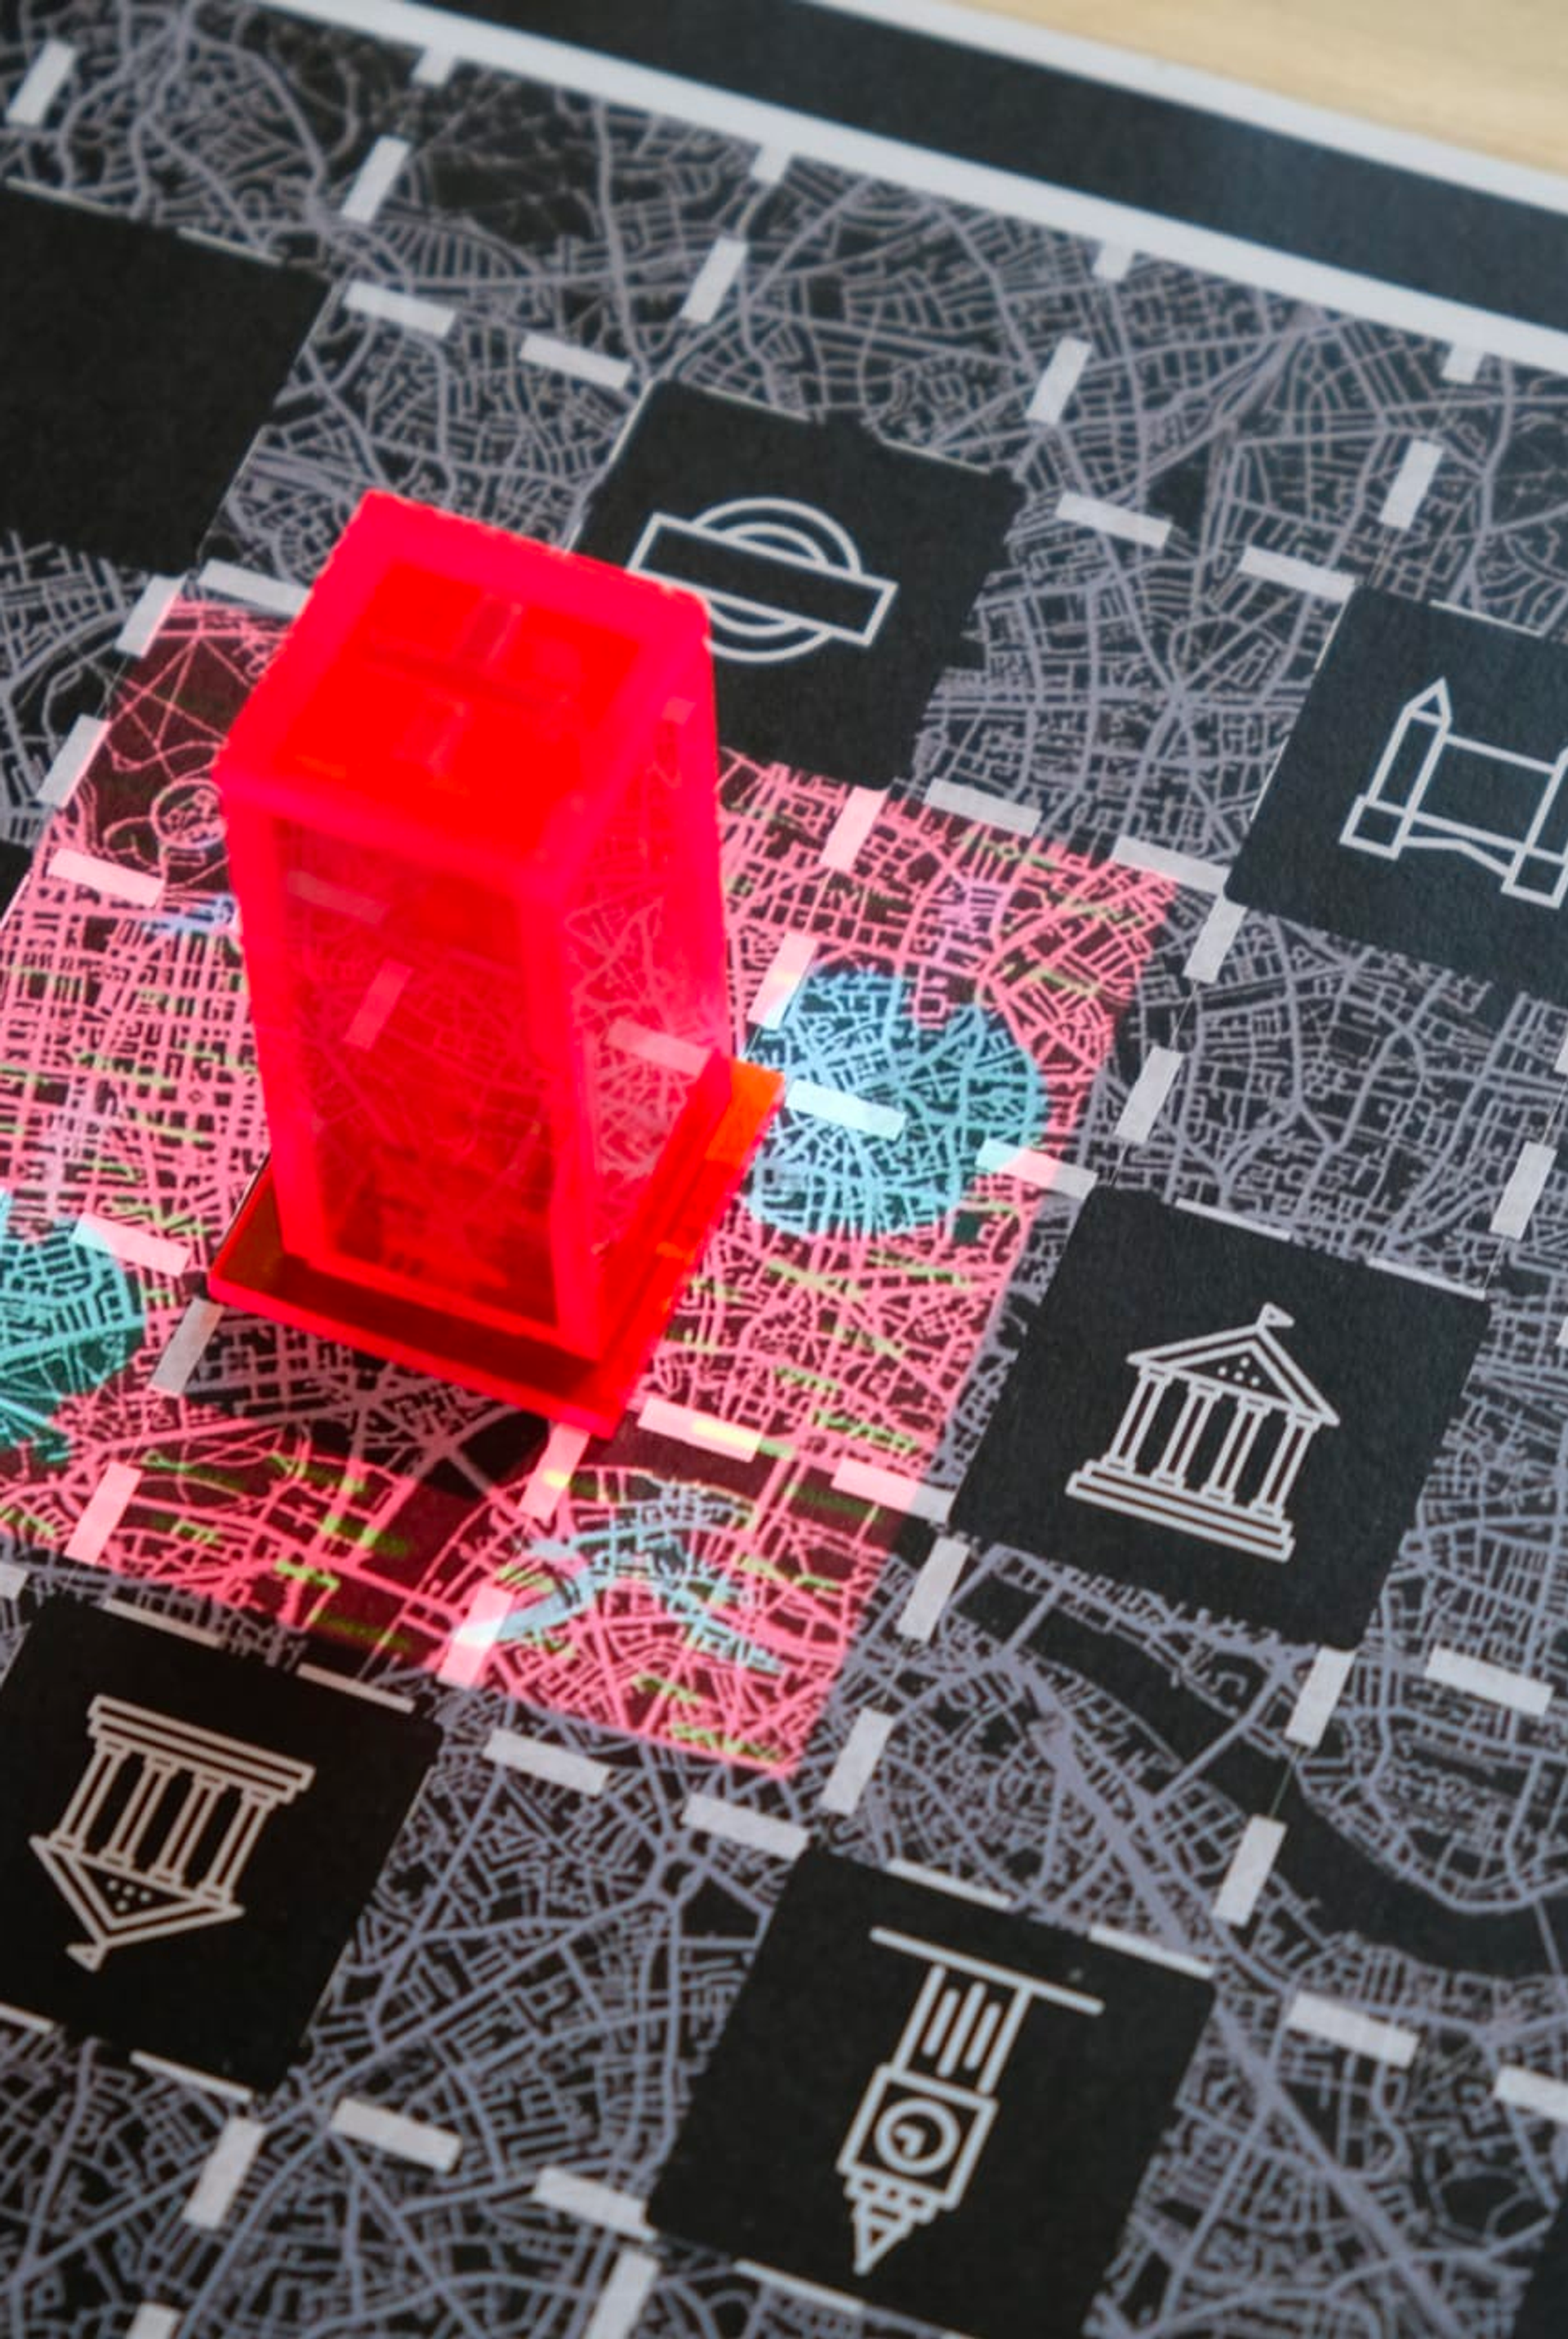 Image of a close-up on what looks like a black, white and red board, with a grid pattern over a street map background, and a red translucent tower shaped object, placed on it. By Zhetong Shen